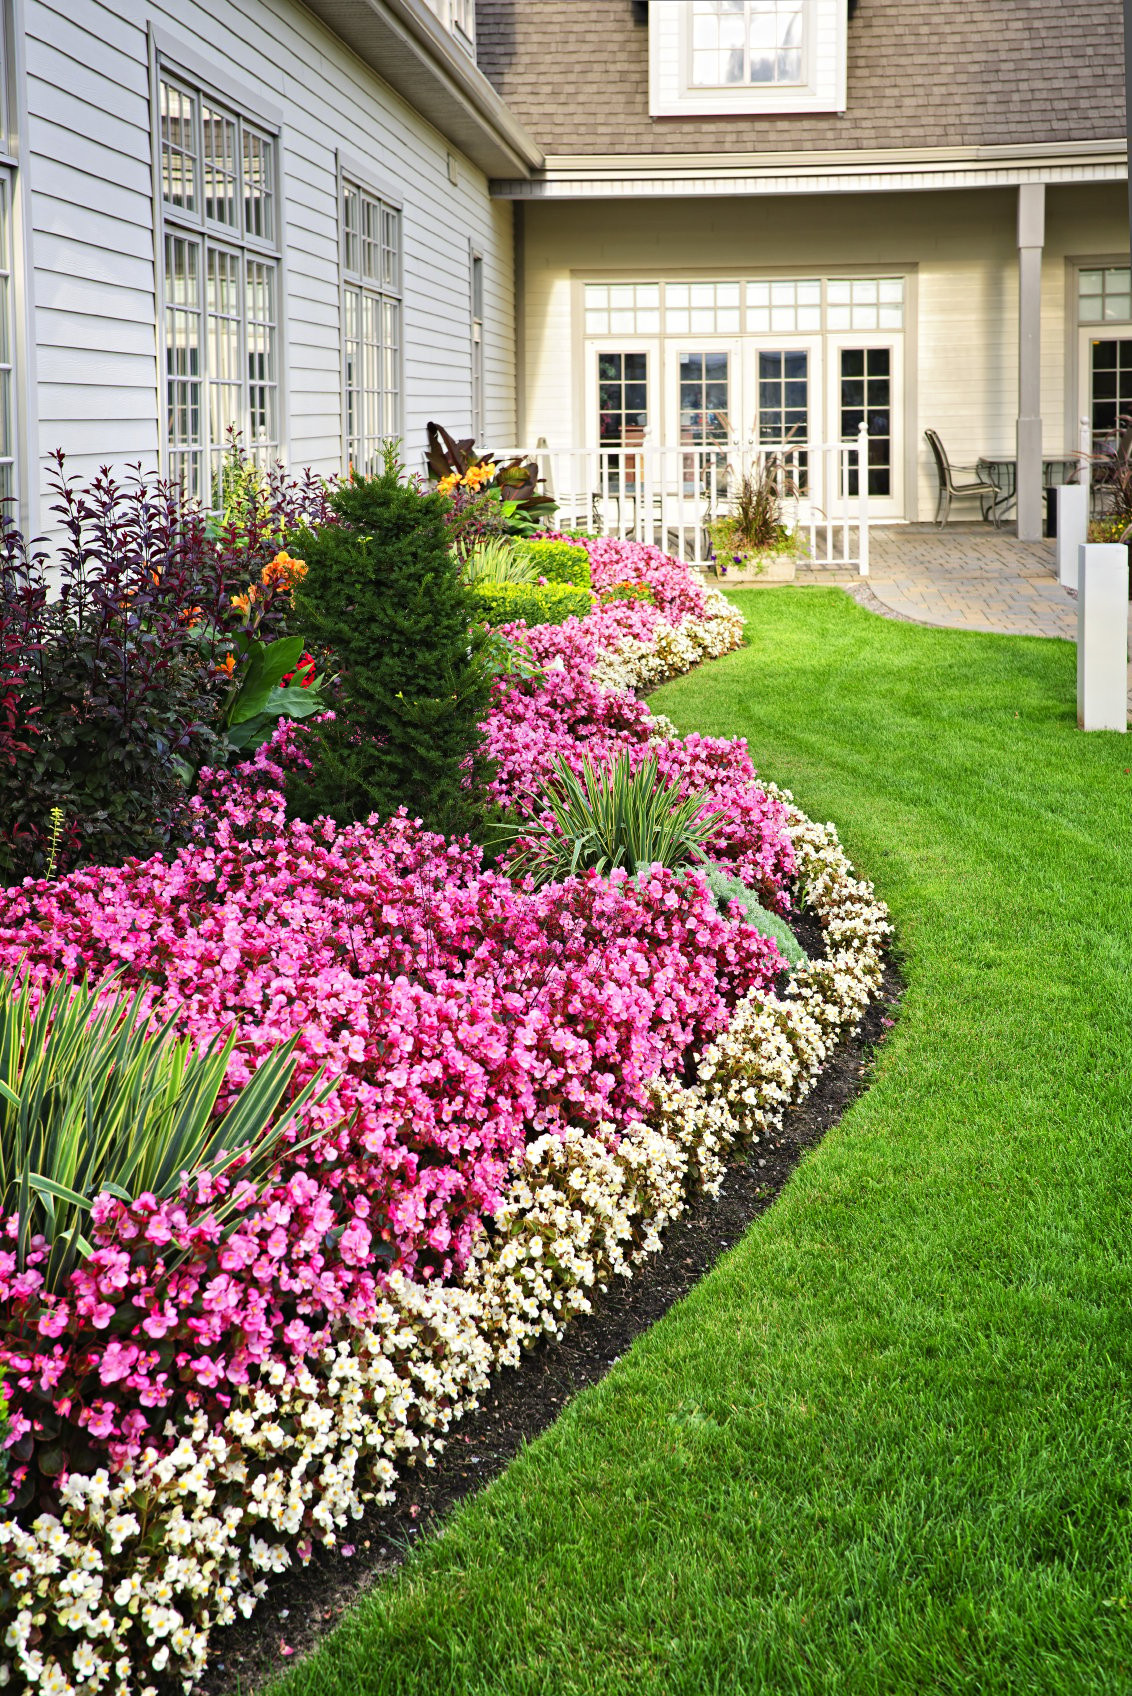 Inspirational Residential Landscaping Ideas To Make Your Yard